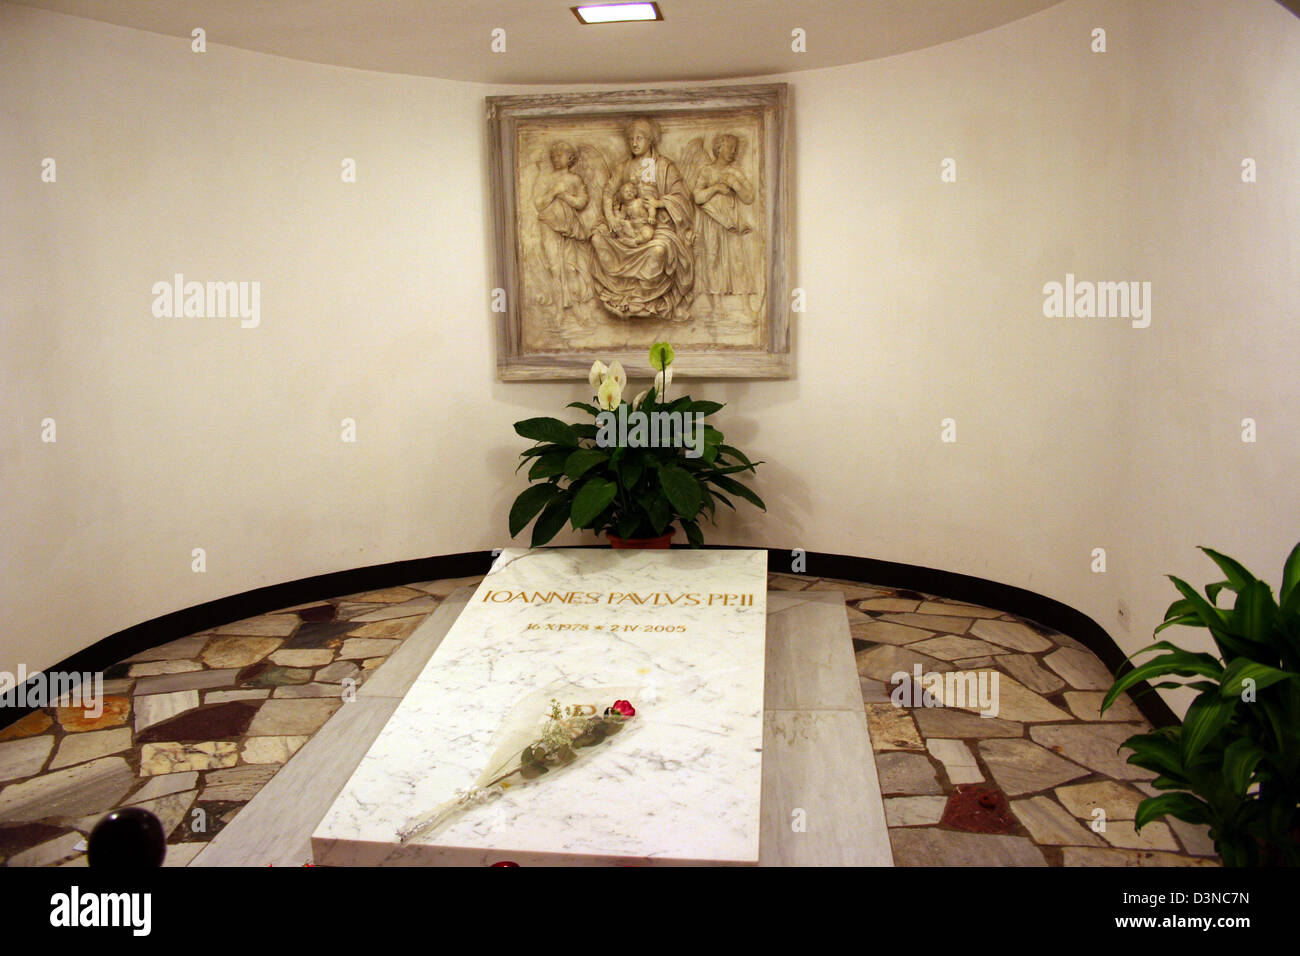 The picture shows the tomb of Pope John Paul II in the Vatican grottos